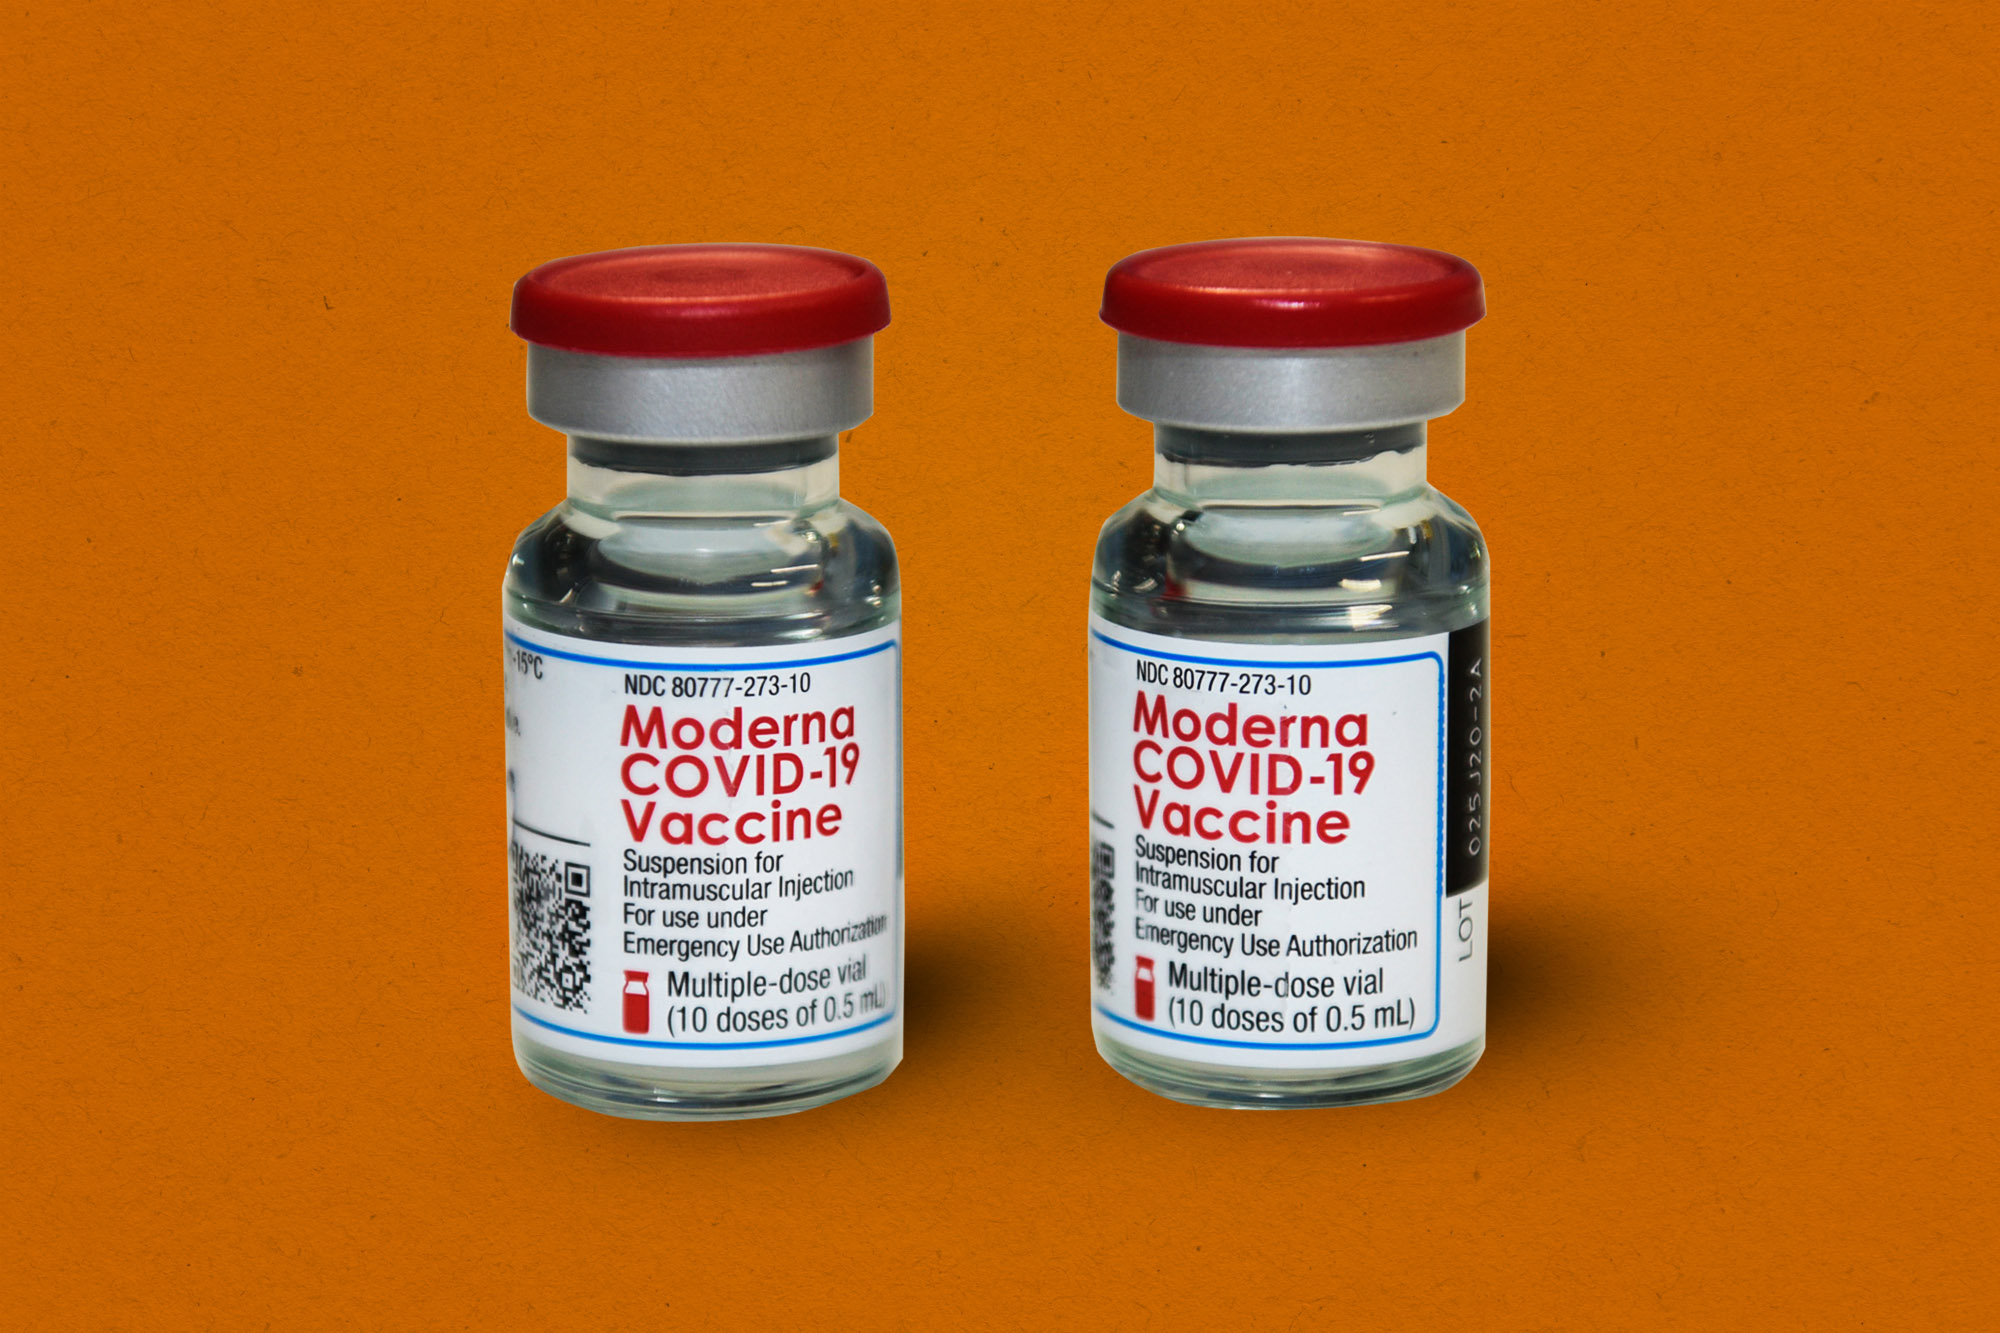 Two vials of the Moderna covid-19 vaccine